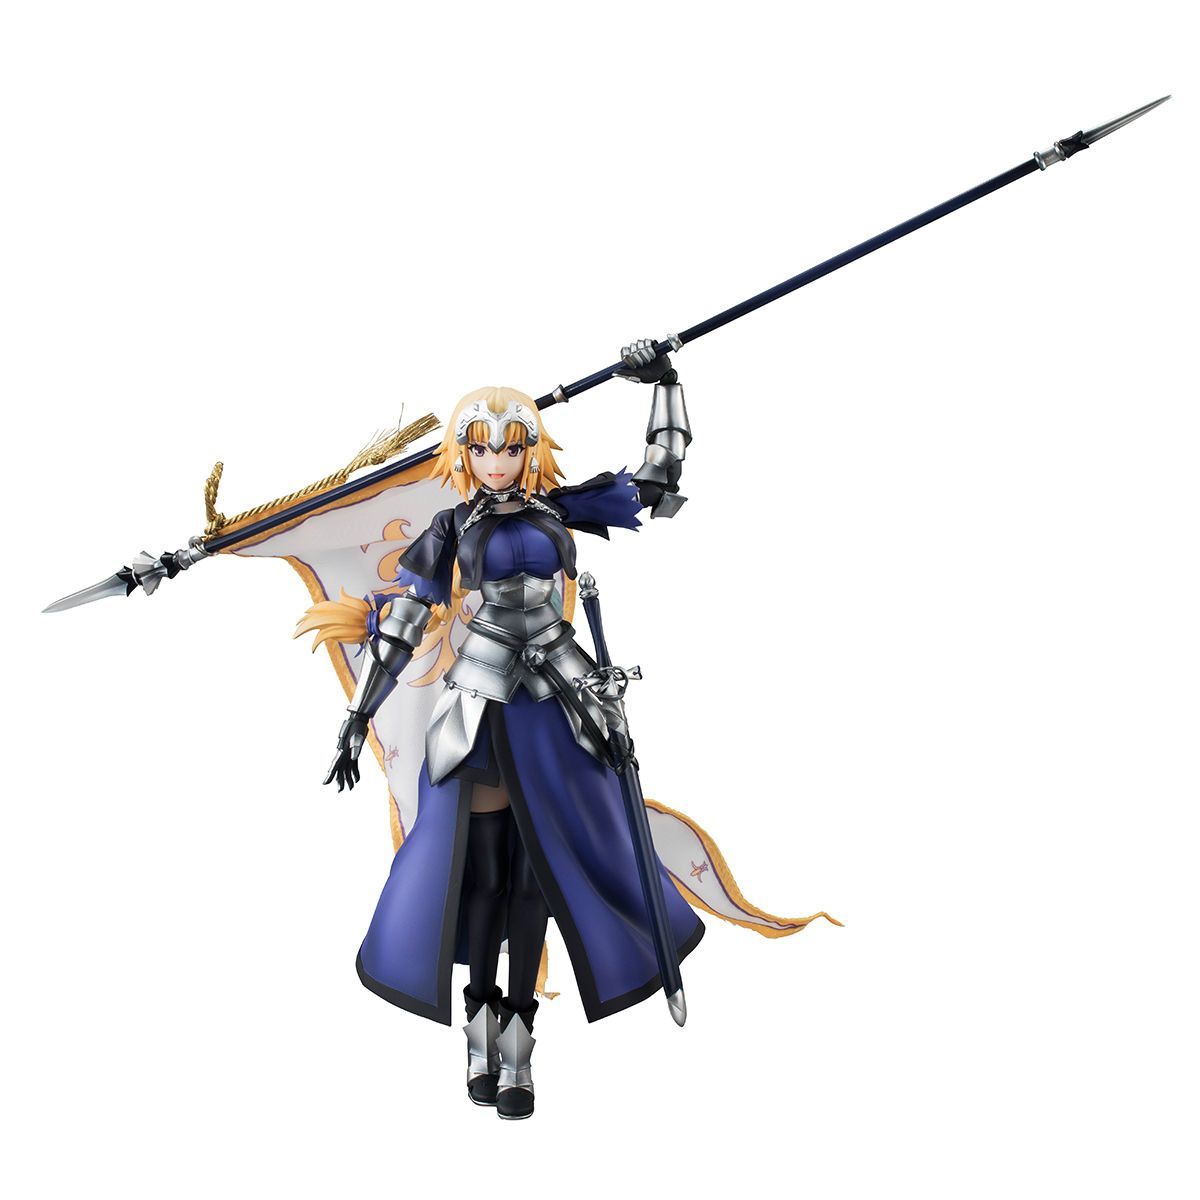 goodie - Ruler/Jeanne d'Arc - Variable Action Heroes DX - Megahouse